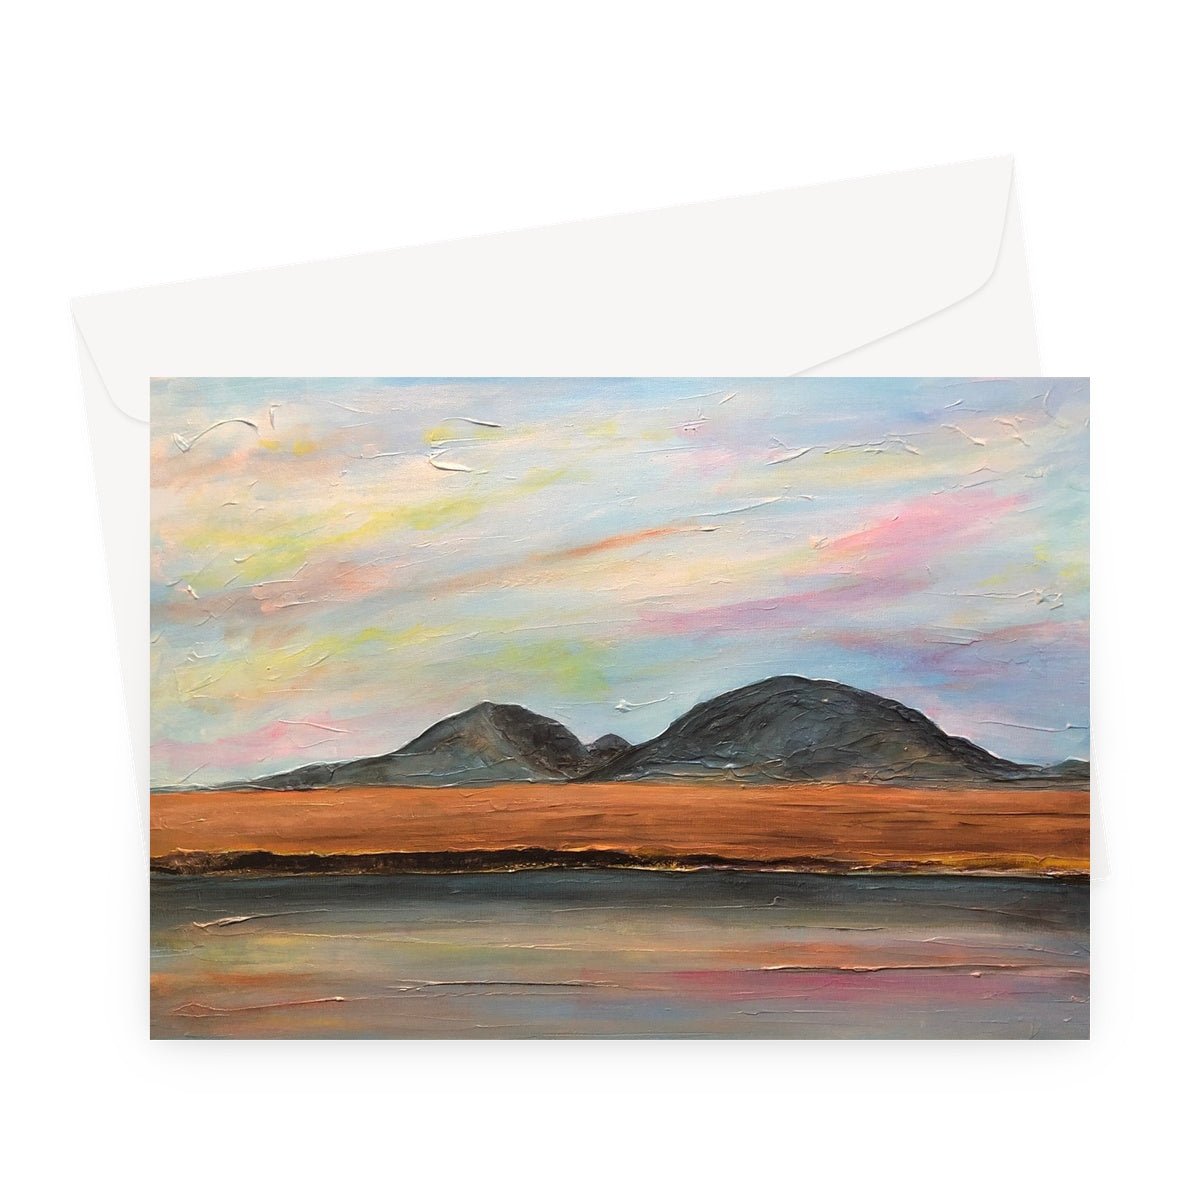 Jura Dawn Art Gifts Greeting Card-Greetings Cards-Hebridean Islands Art Gallery-A5 Landscape-1 Card-Paintings, Prints, Homeware, Art Gifts From Scotland By Scottish Artist Kevin Hunter